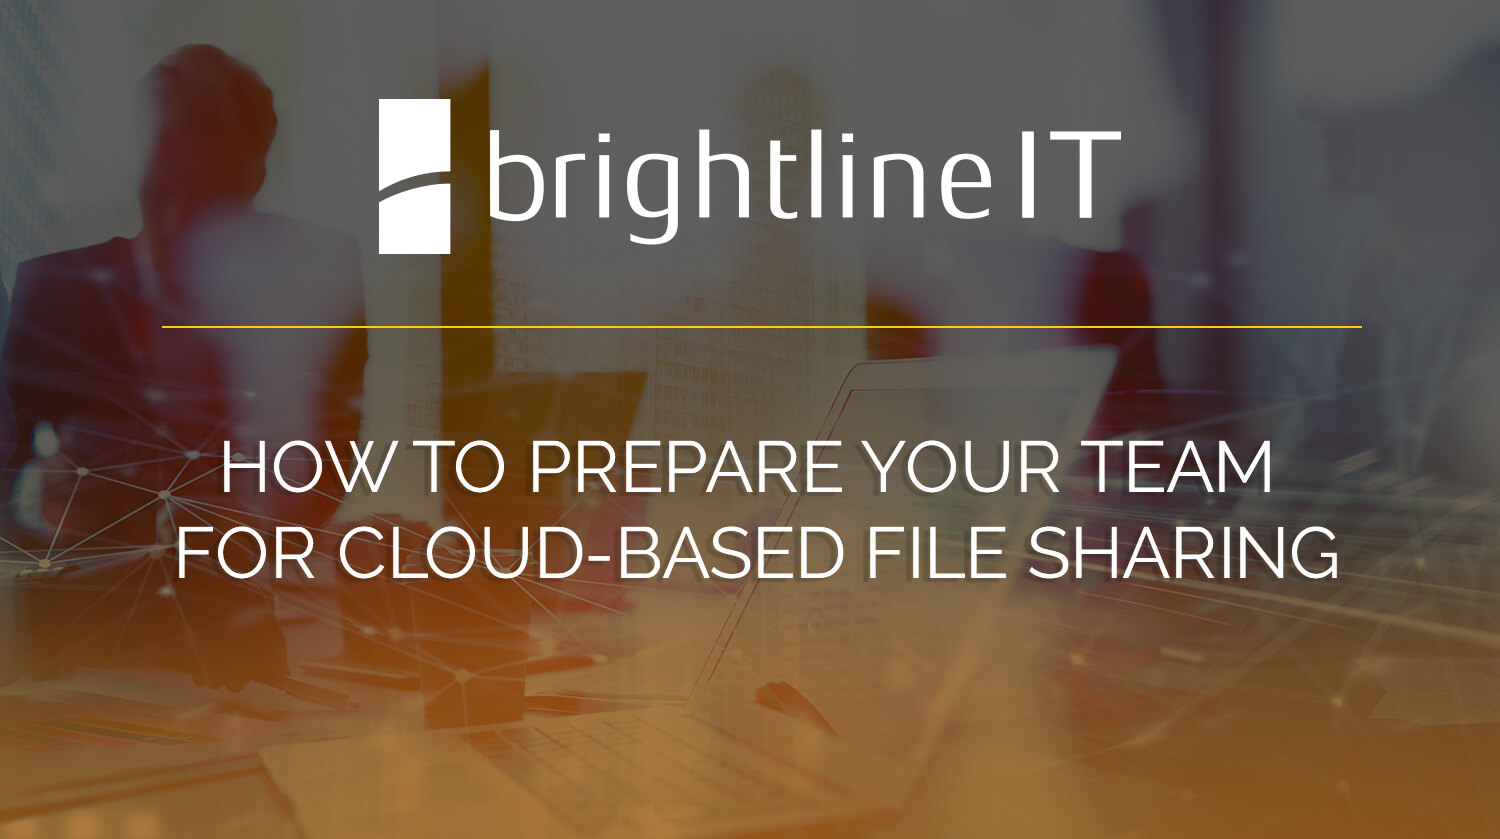 How to Prepare Your Team for Cloud-Based File Sharing